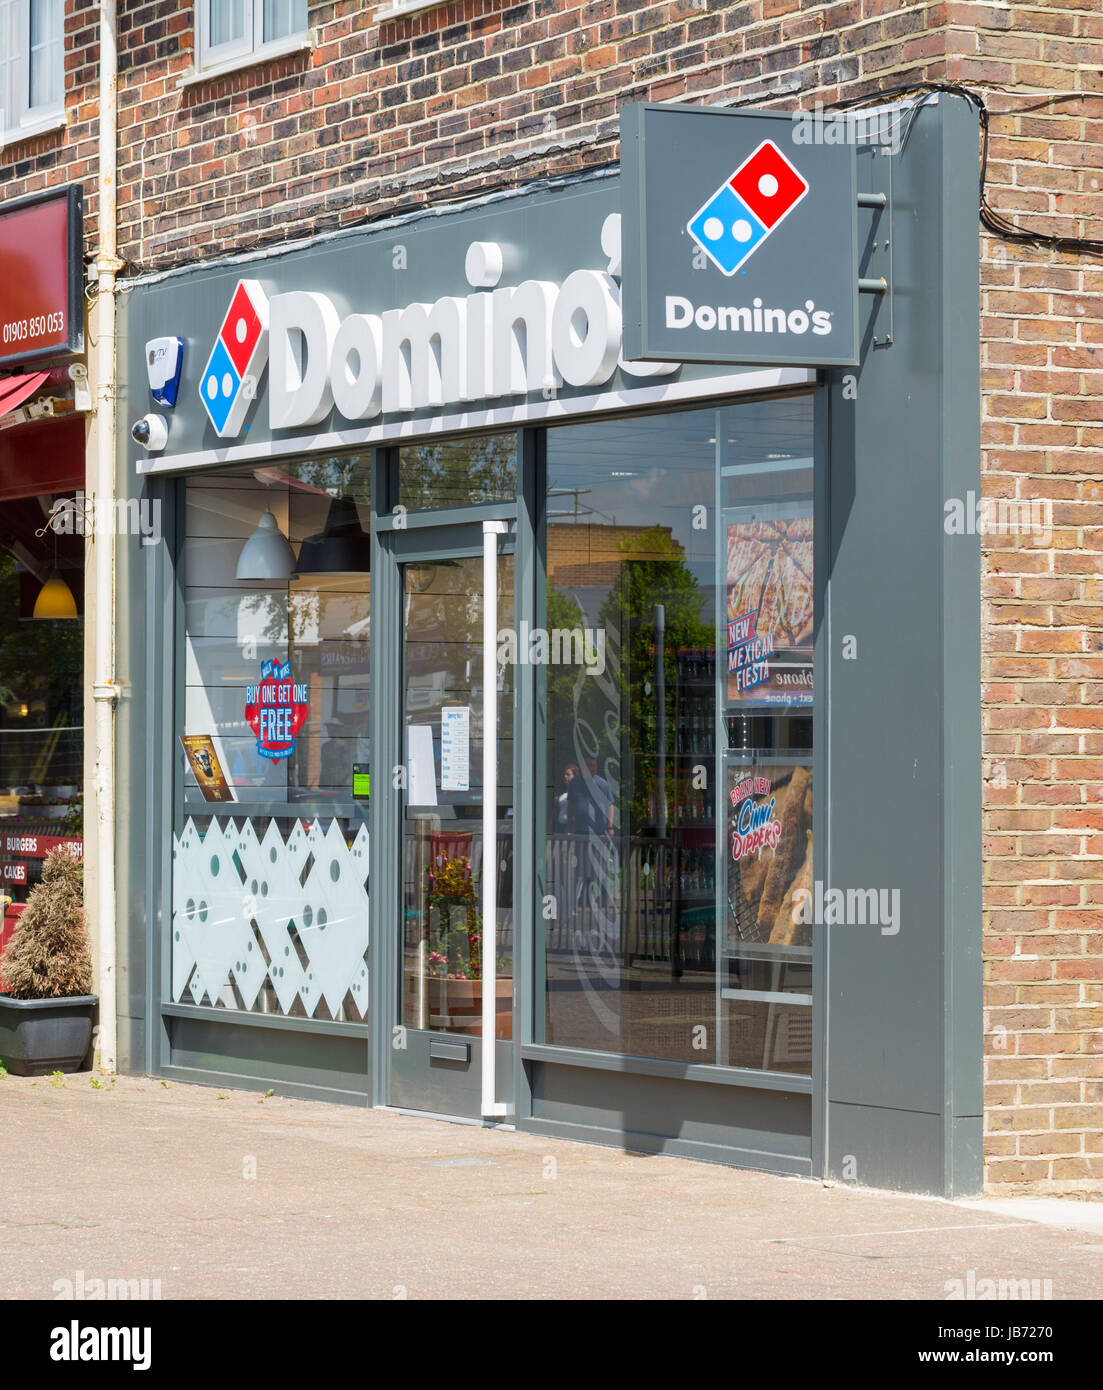 Domino's pizza shop front in the UK. Stock Photo